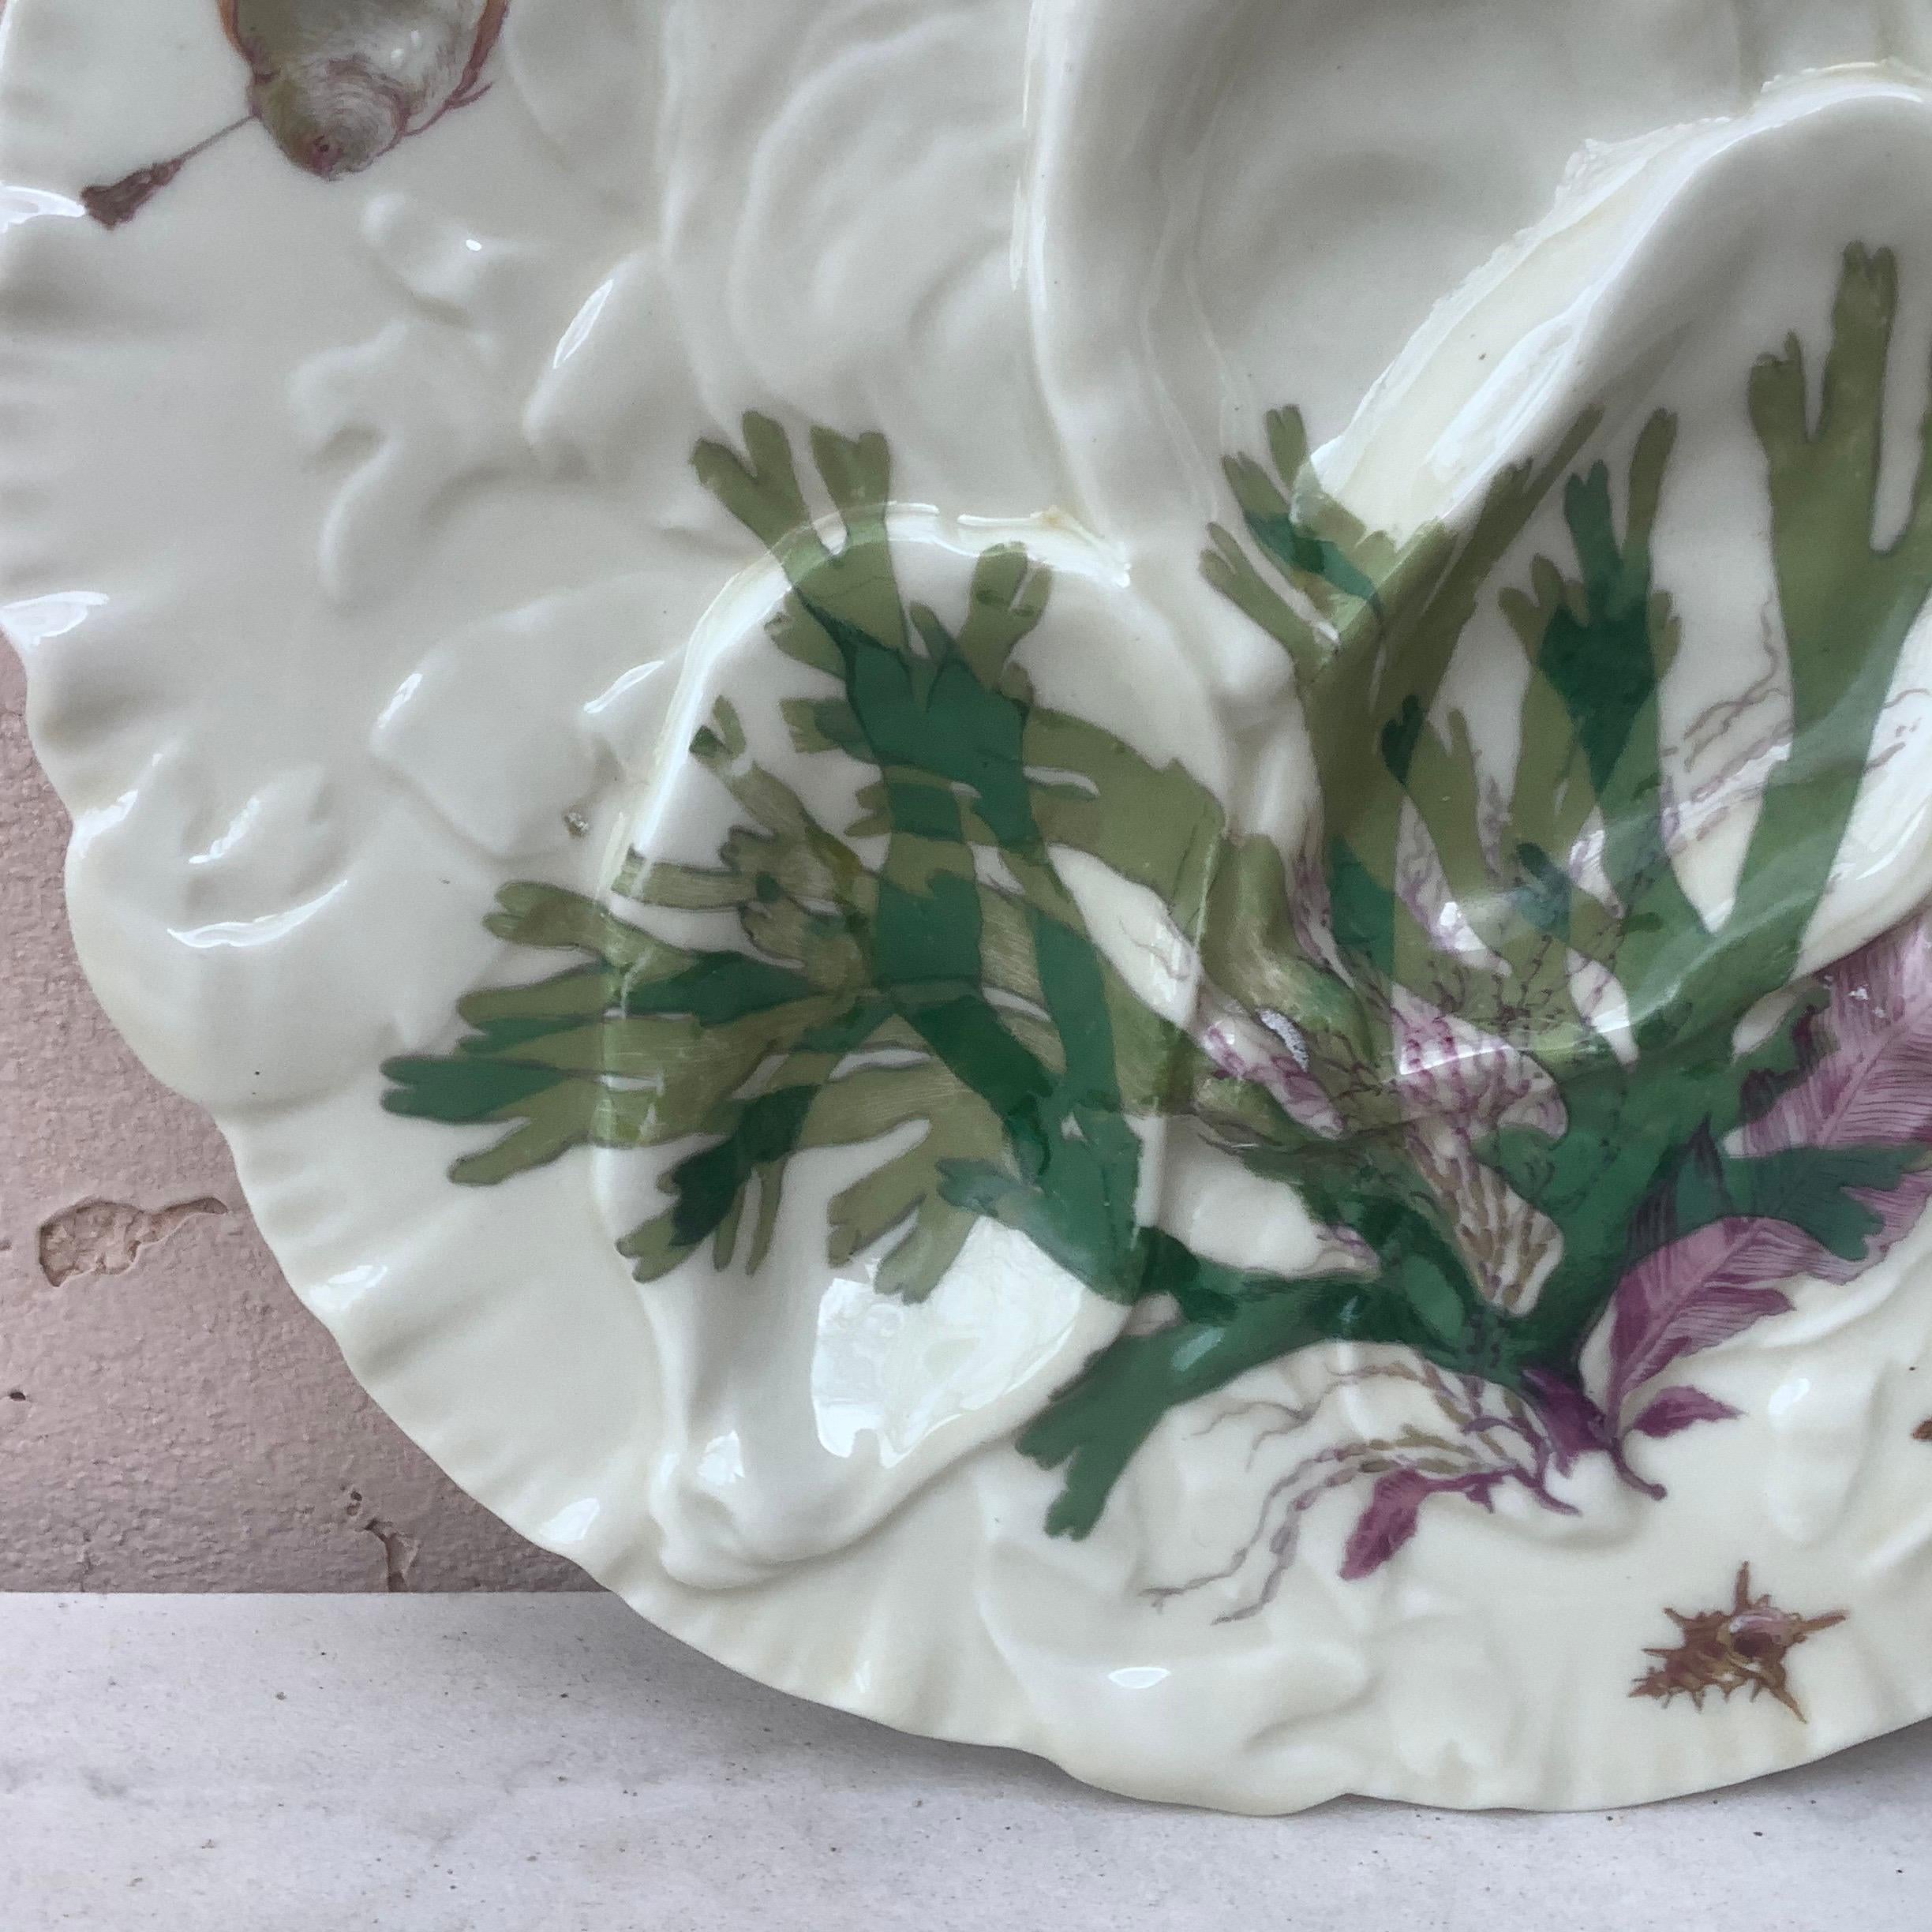 Antique 19th-Century French porcelain oyster plate with sealife pattern (shells, seaweeds, starfish, fishs ) signed Limoges Haviland & C.
